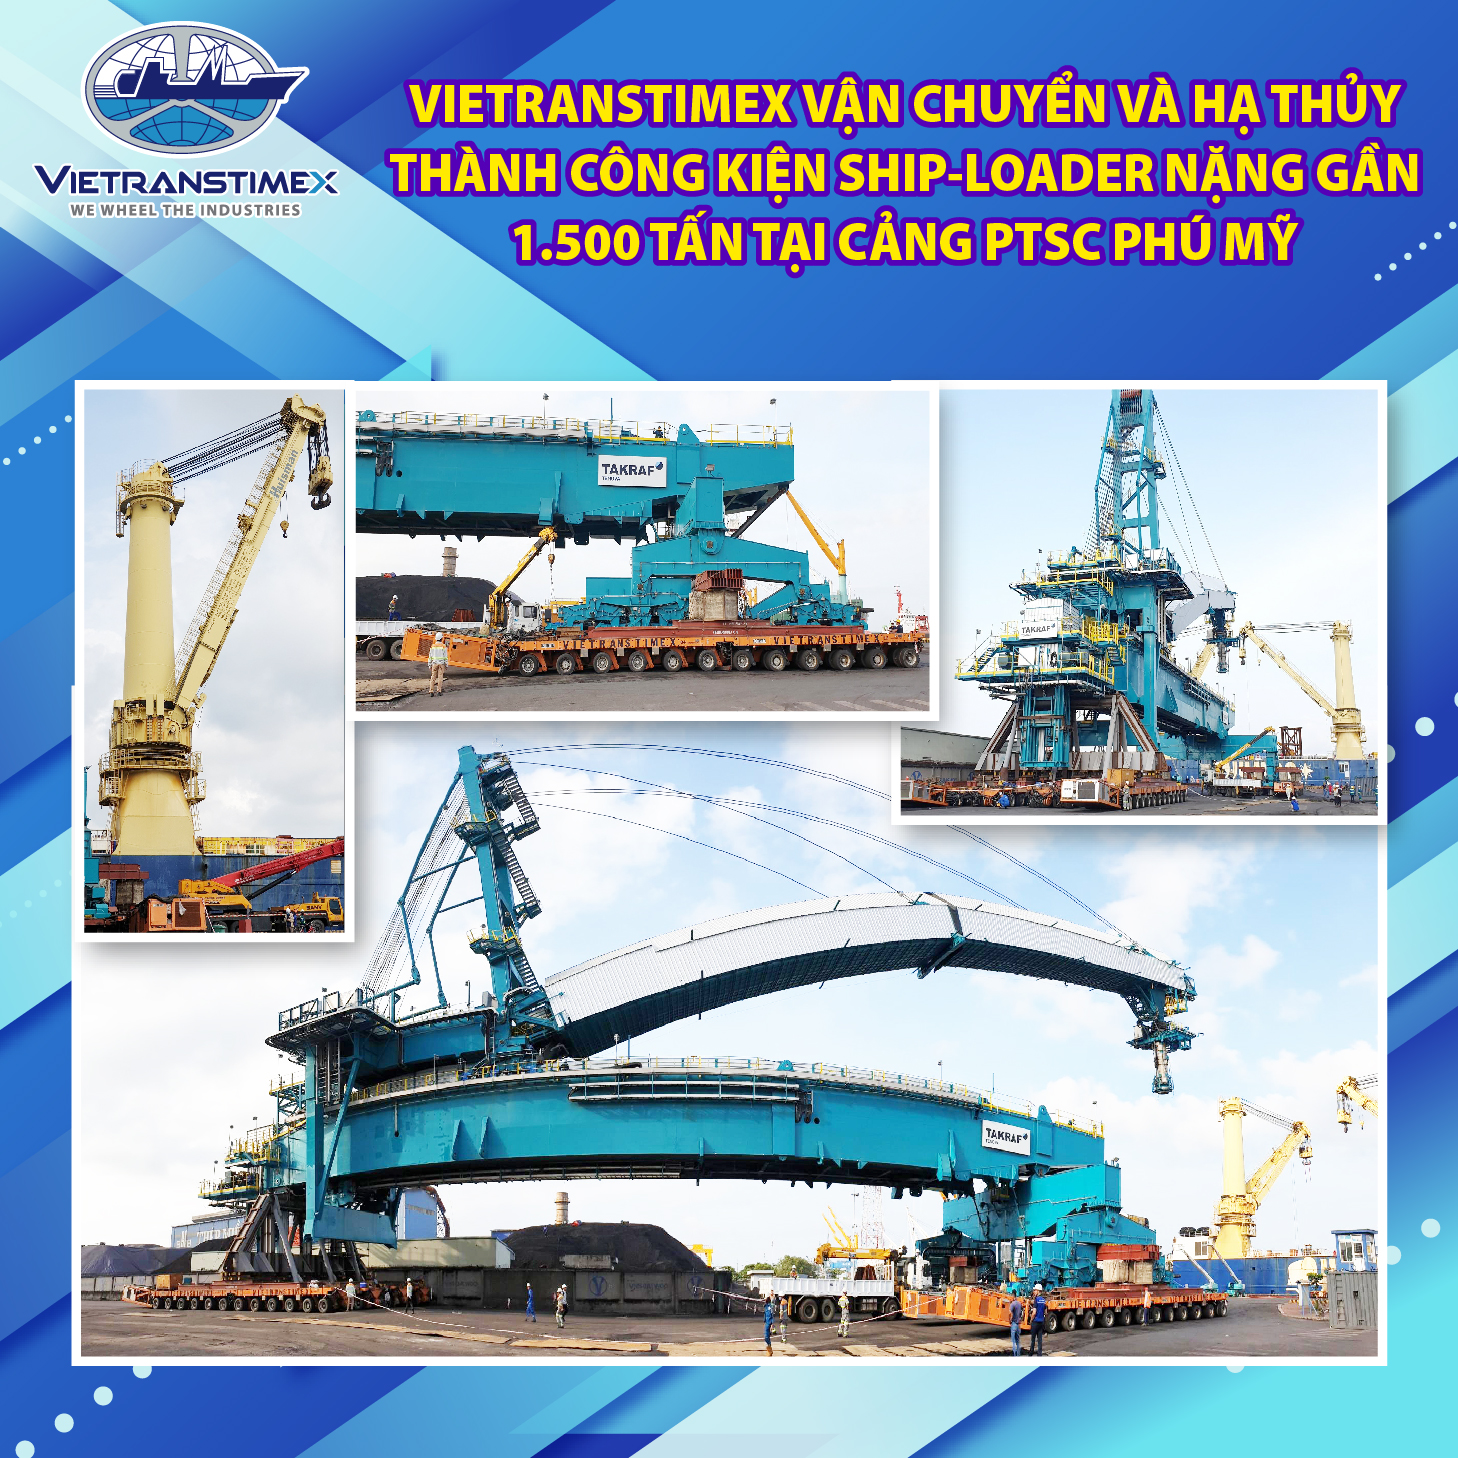 Vietranstimex Successfully Transported And Loaded-Out 1,500 Ton Ship-Loader In PTSC Phu My Port